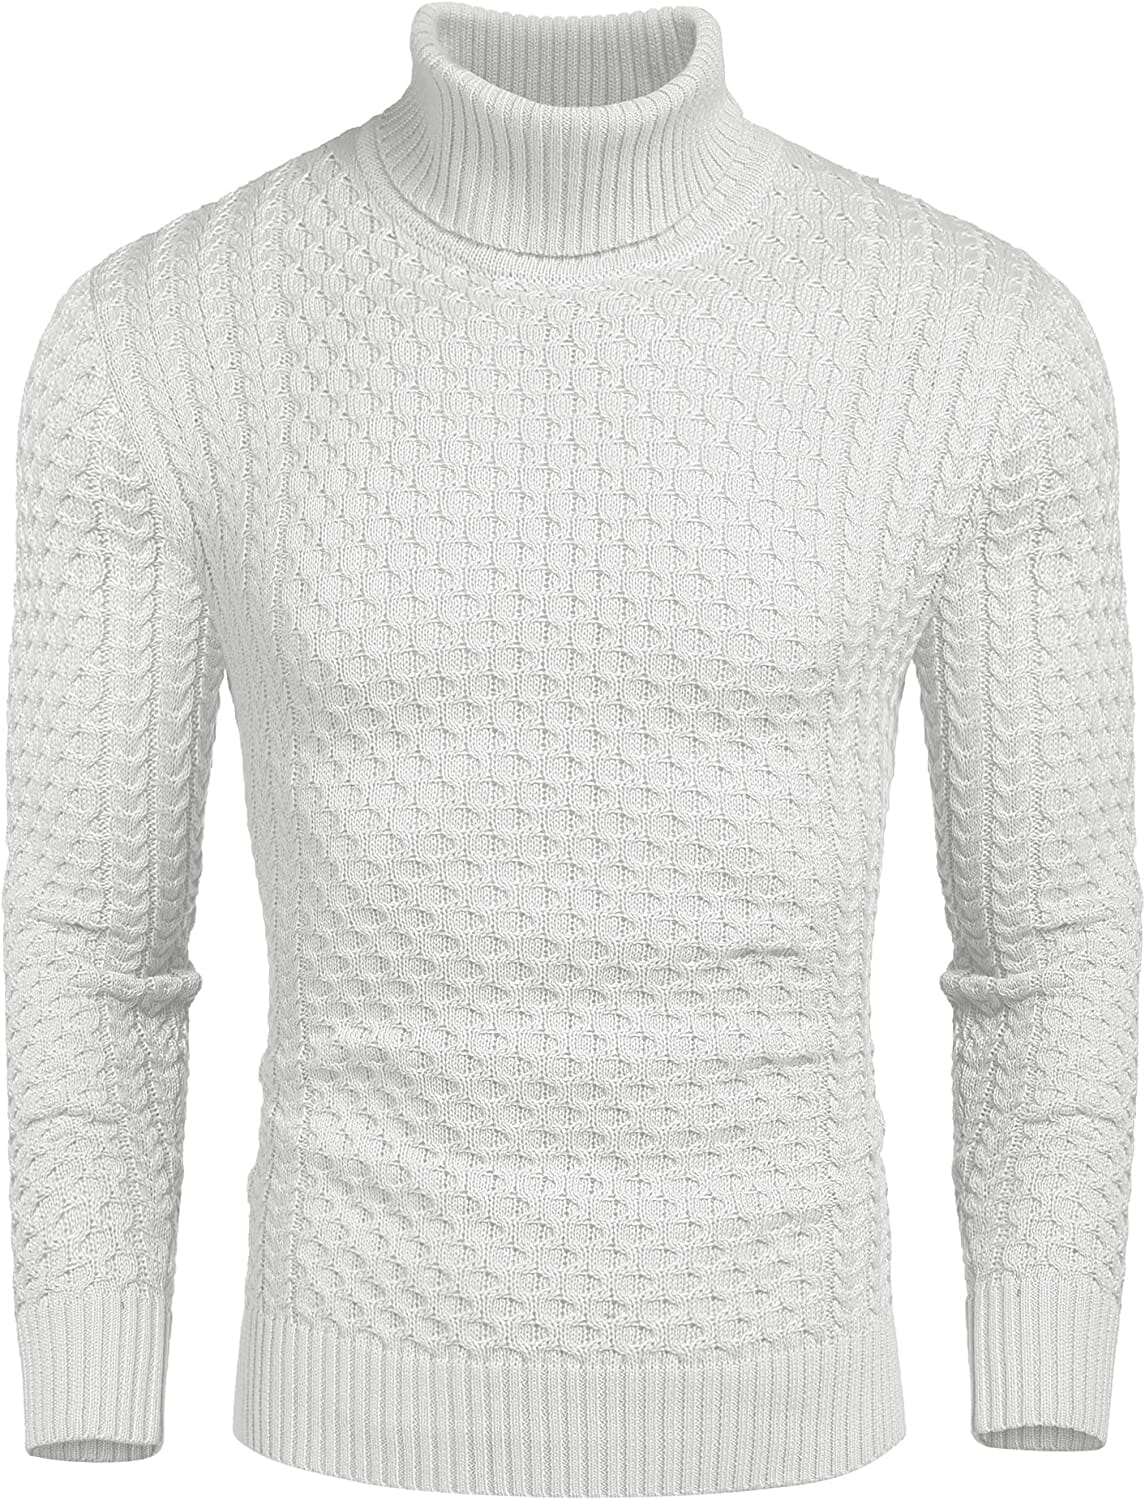 Slim Fit Turtleneck Twisted Sweater (US Only) Sweaters Coofandy's White XS 